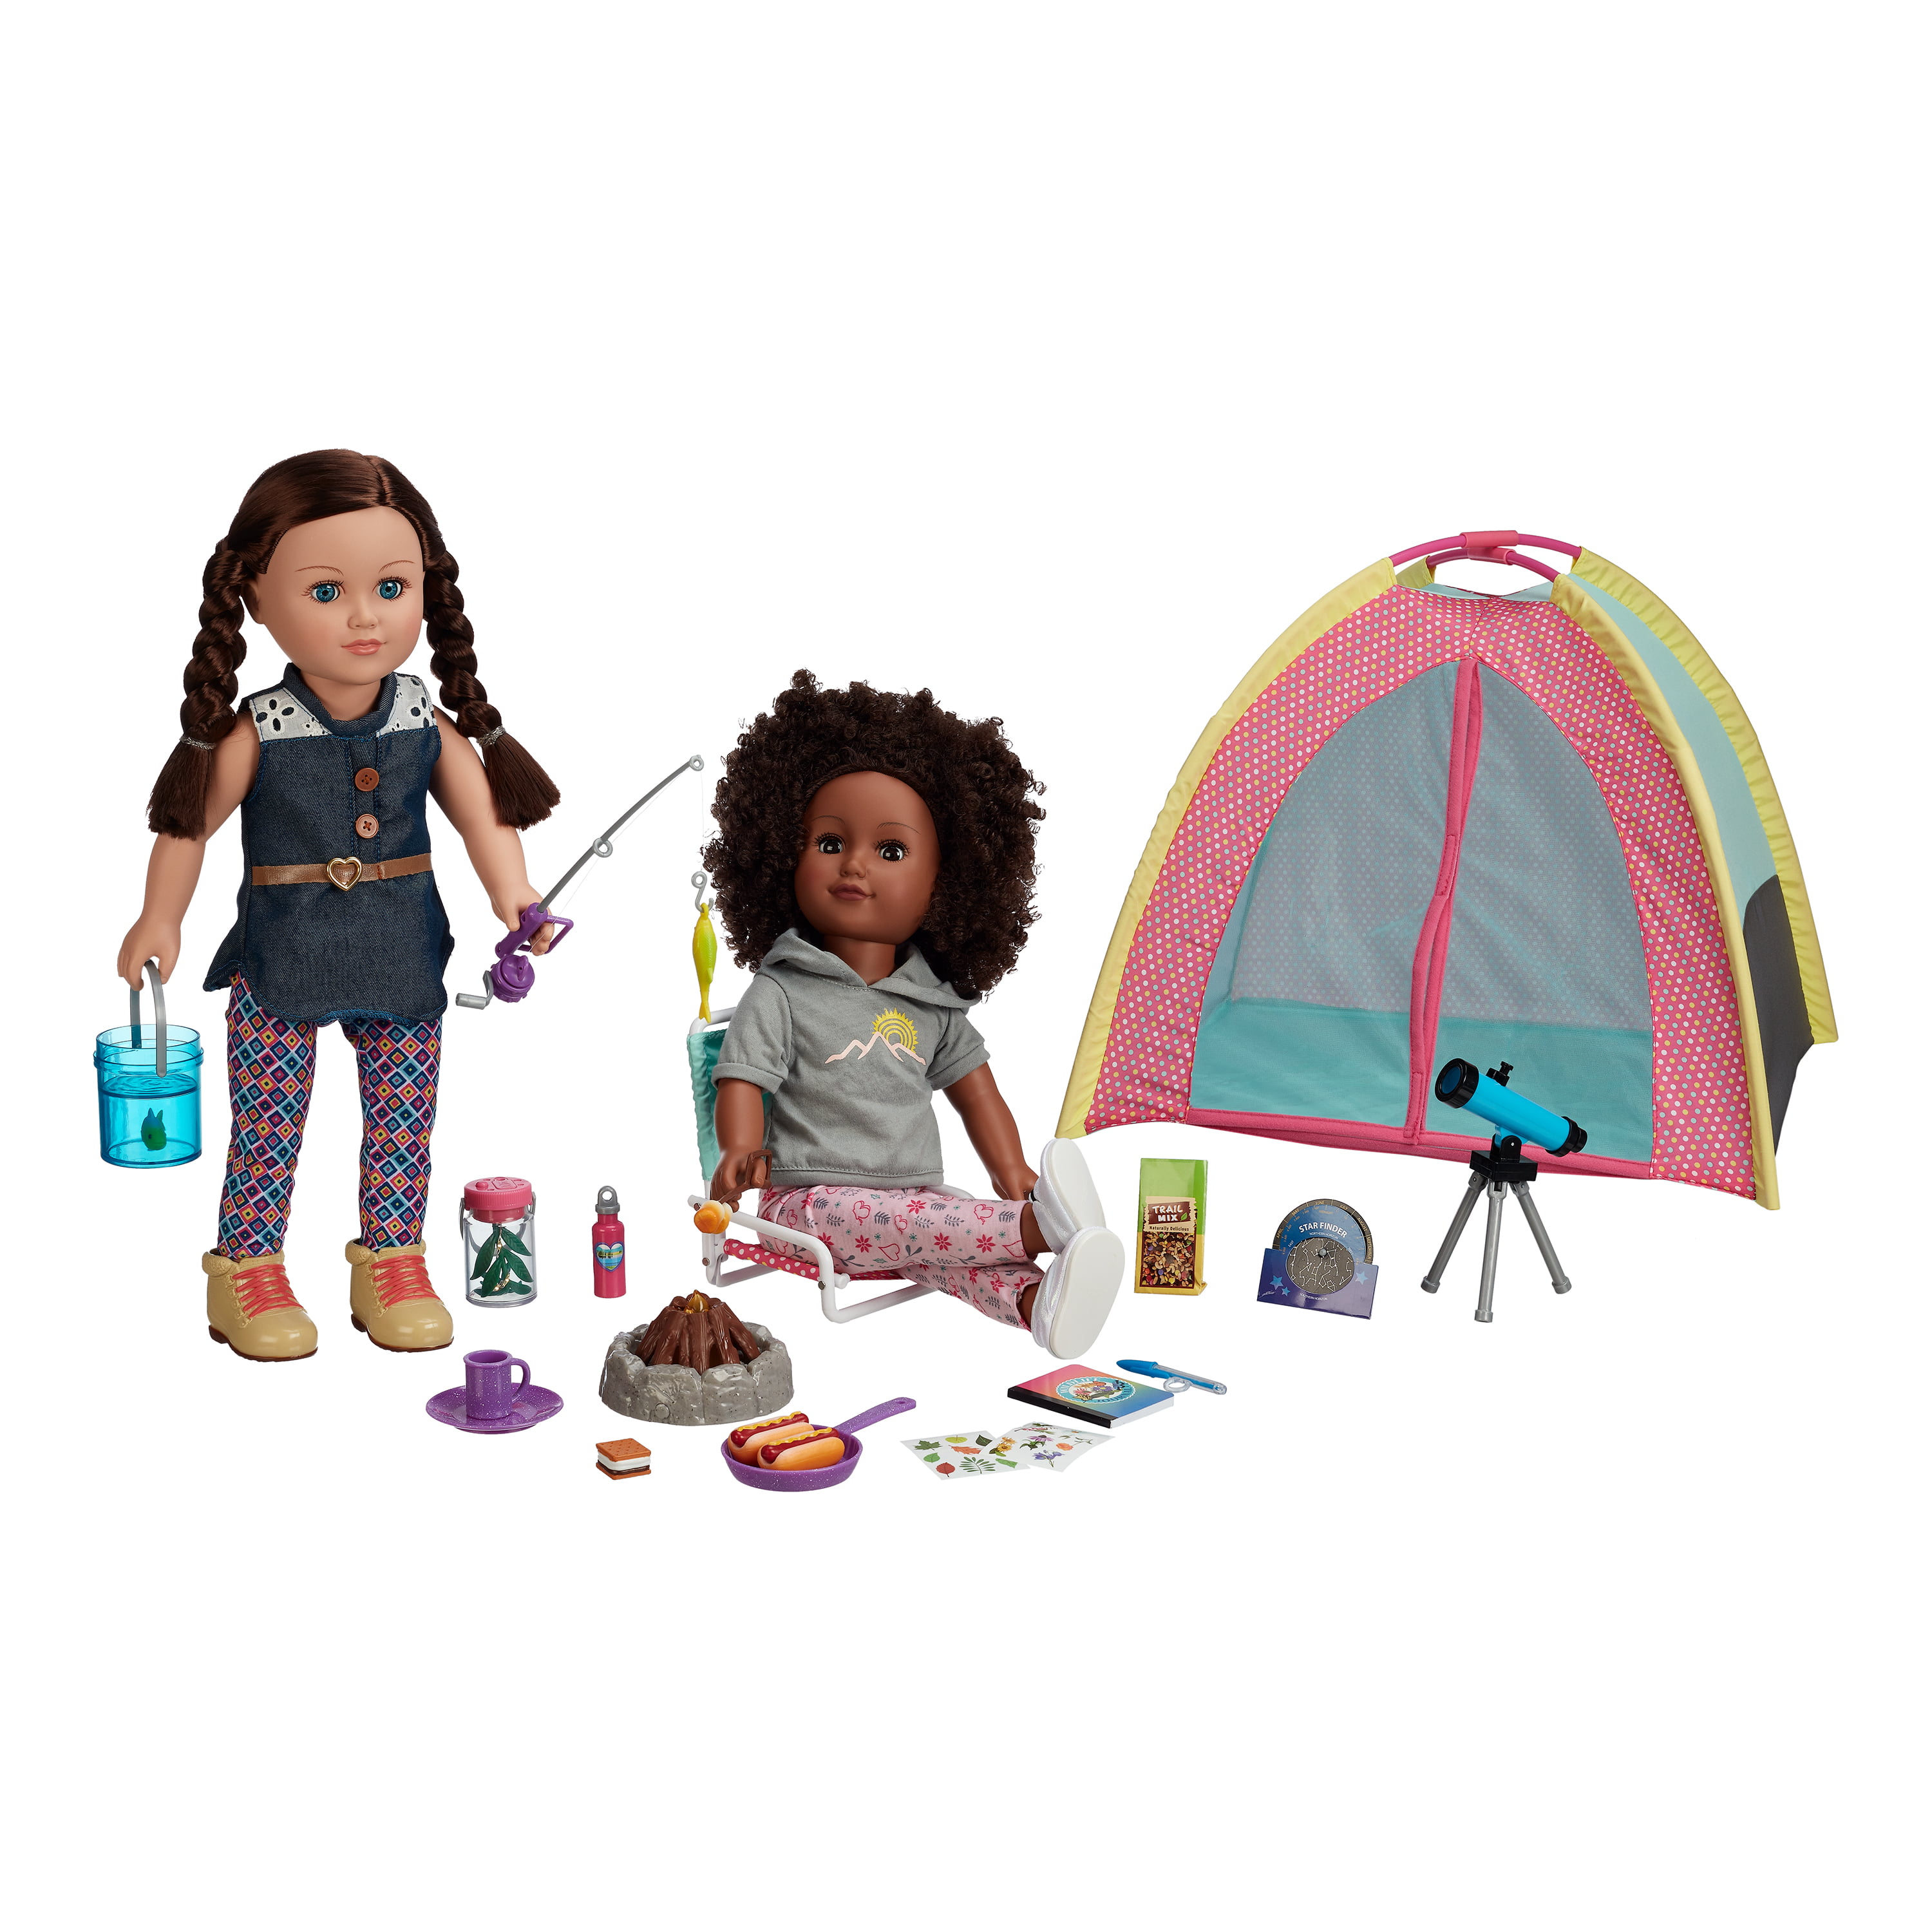 Super Cute Doll Camping Set Newly Redesigned Camping Set for 18 inch Dolls 